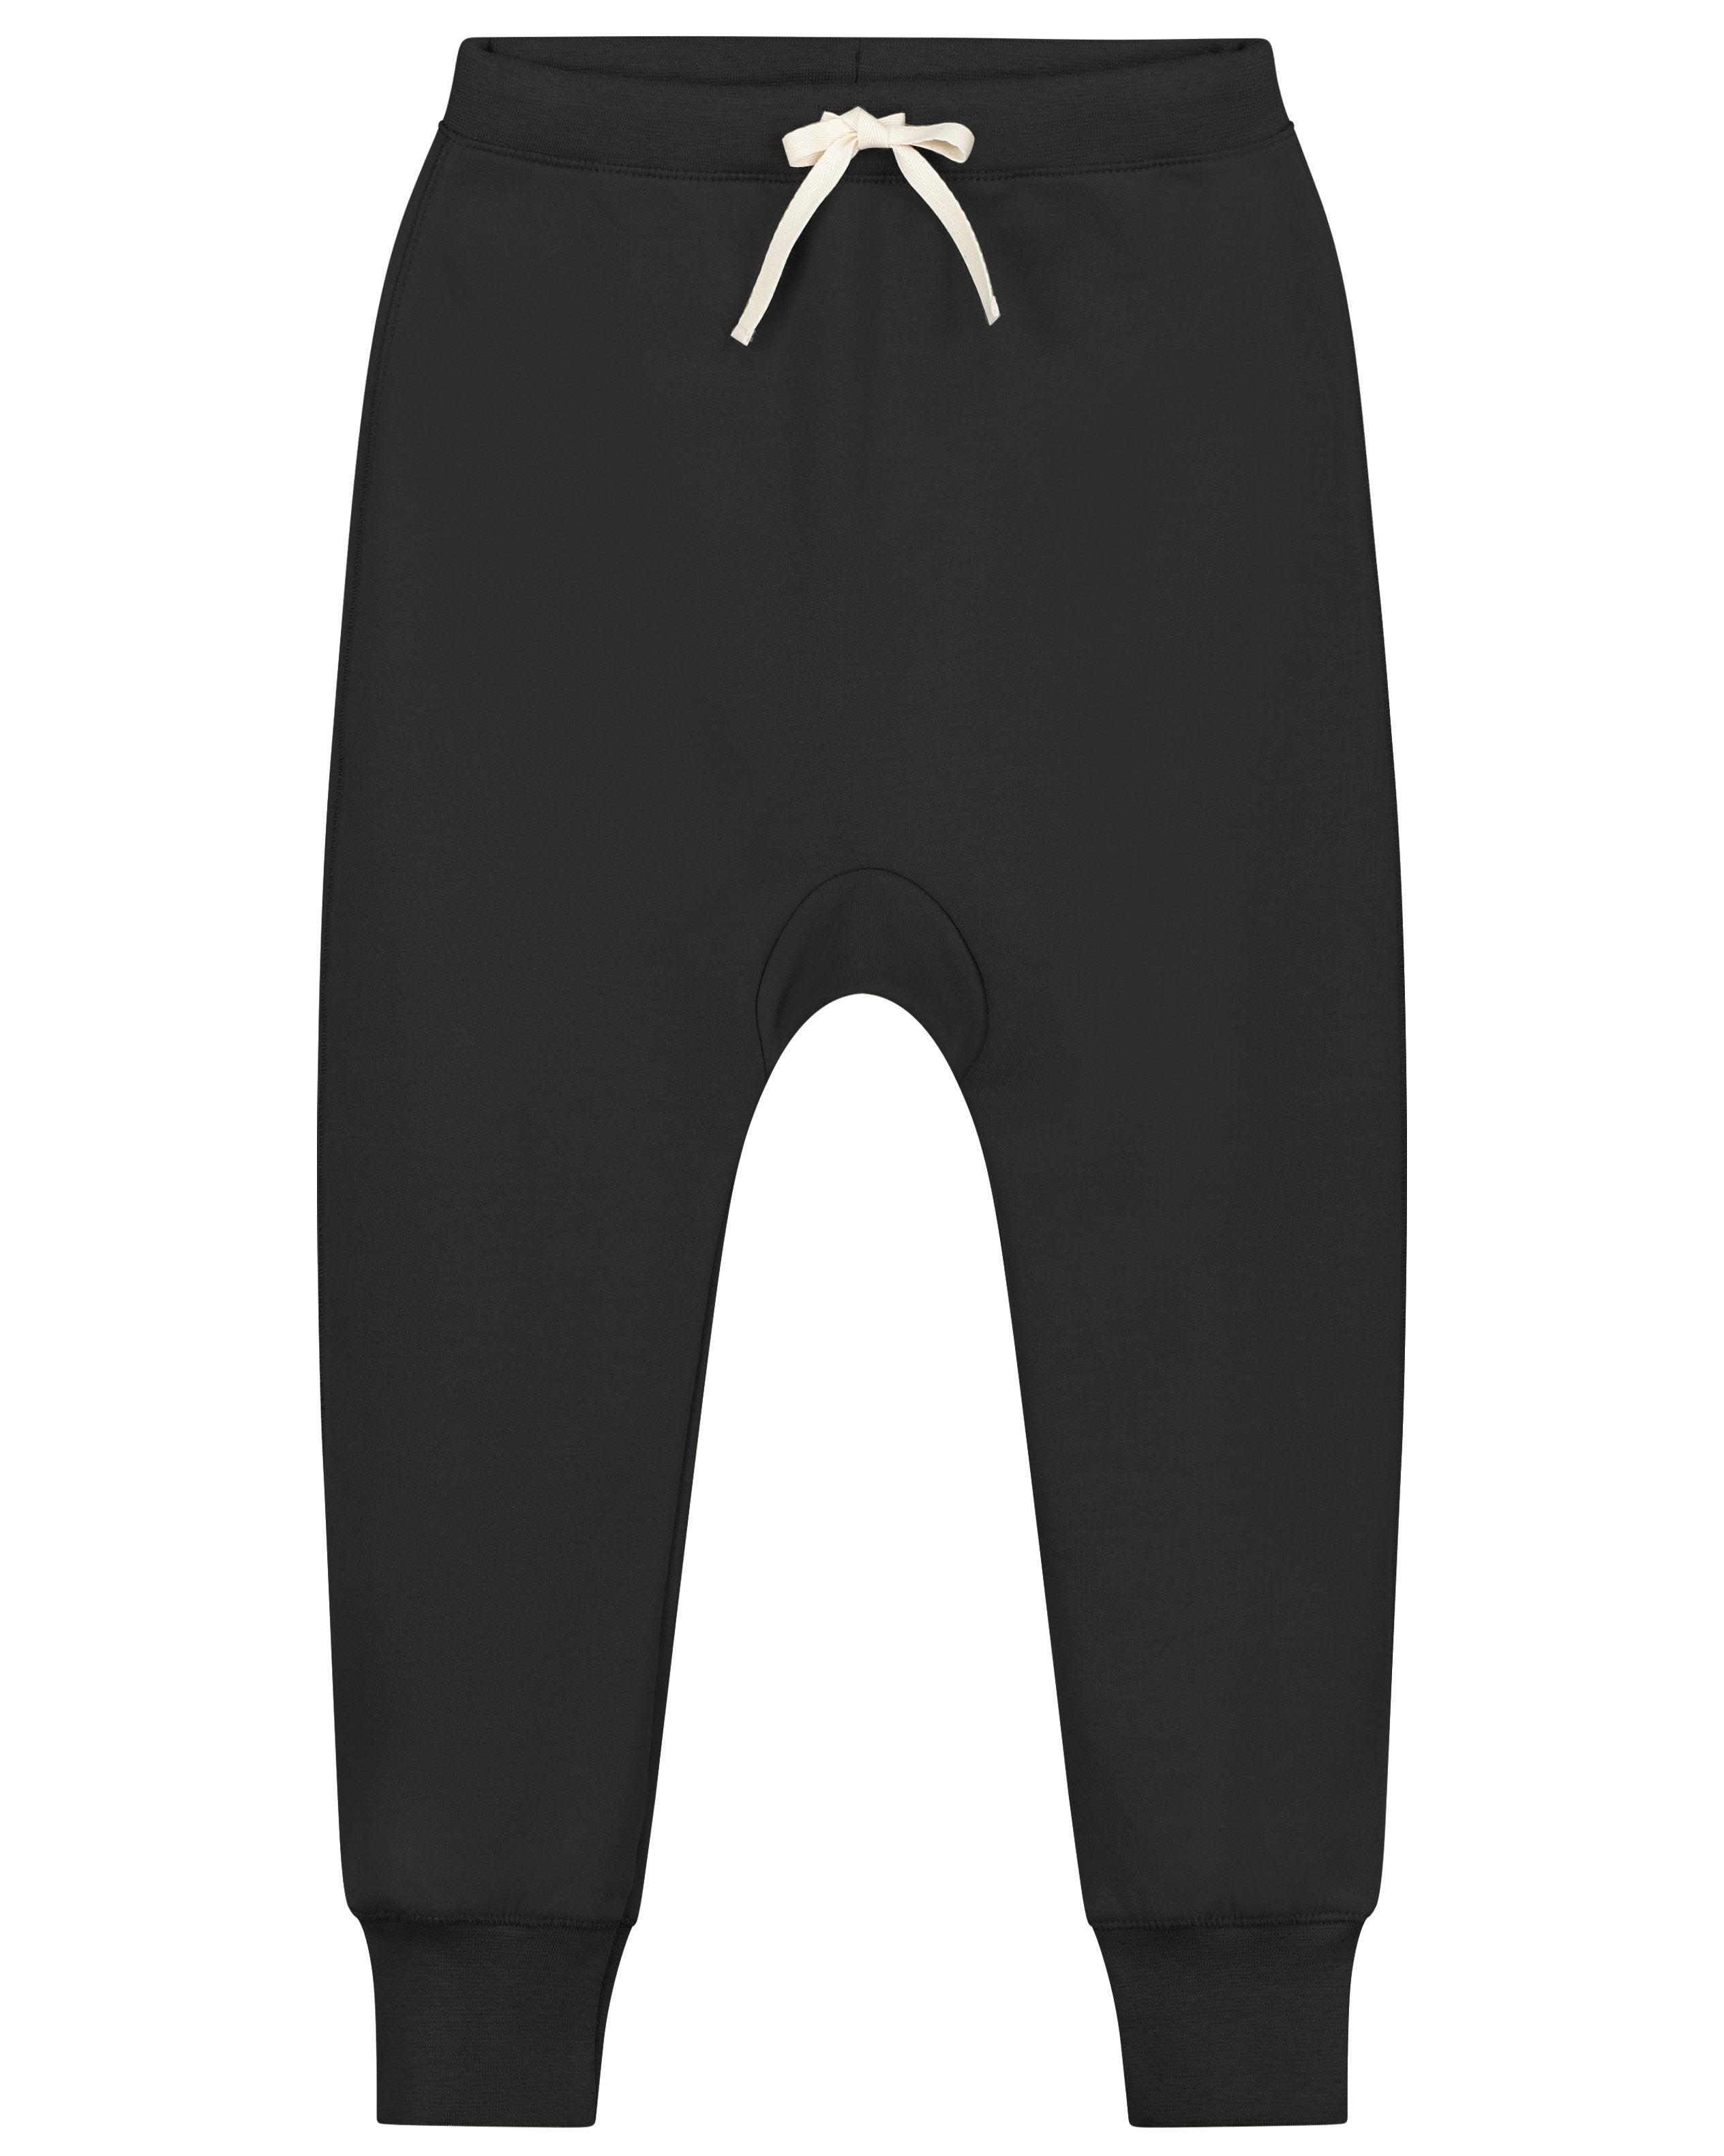 baggy pants in nearly black